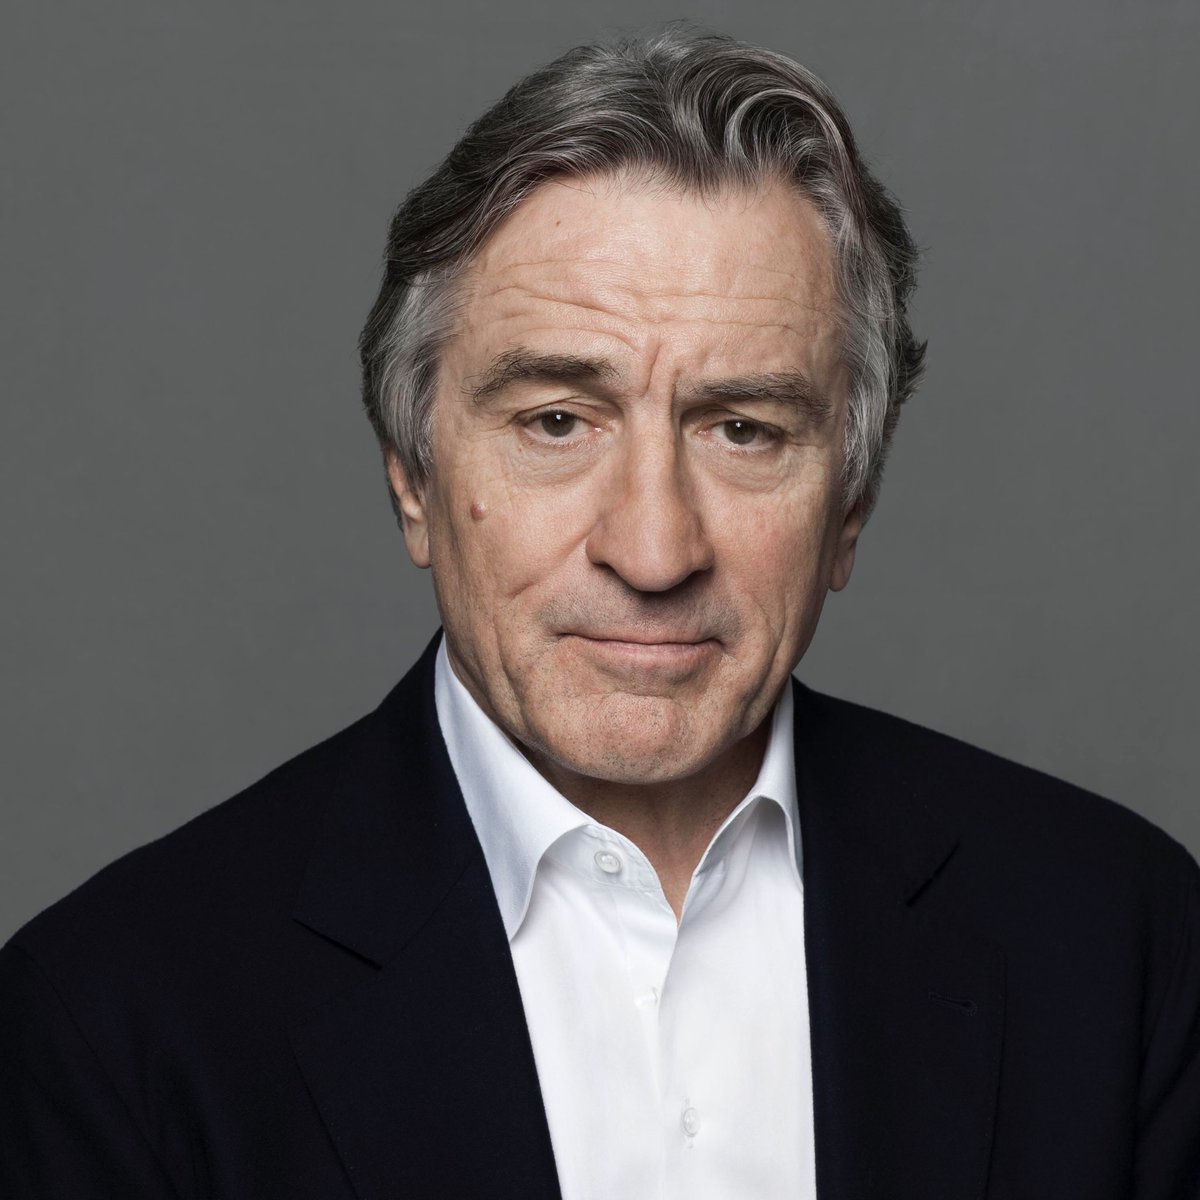 robert de niro - once tied with willem dafoe in a cock wrestling match